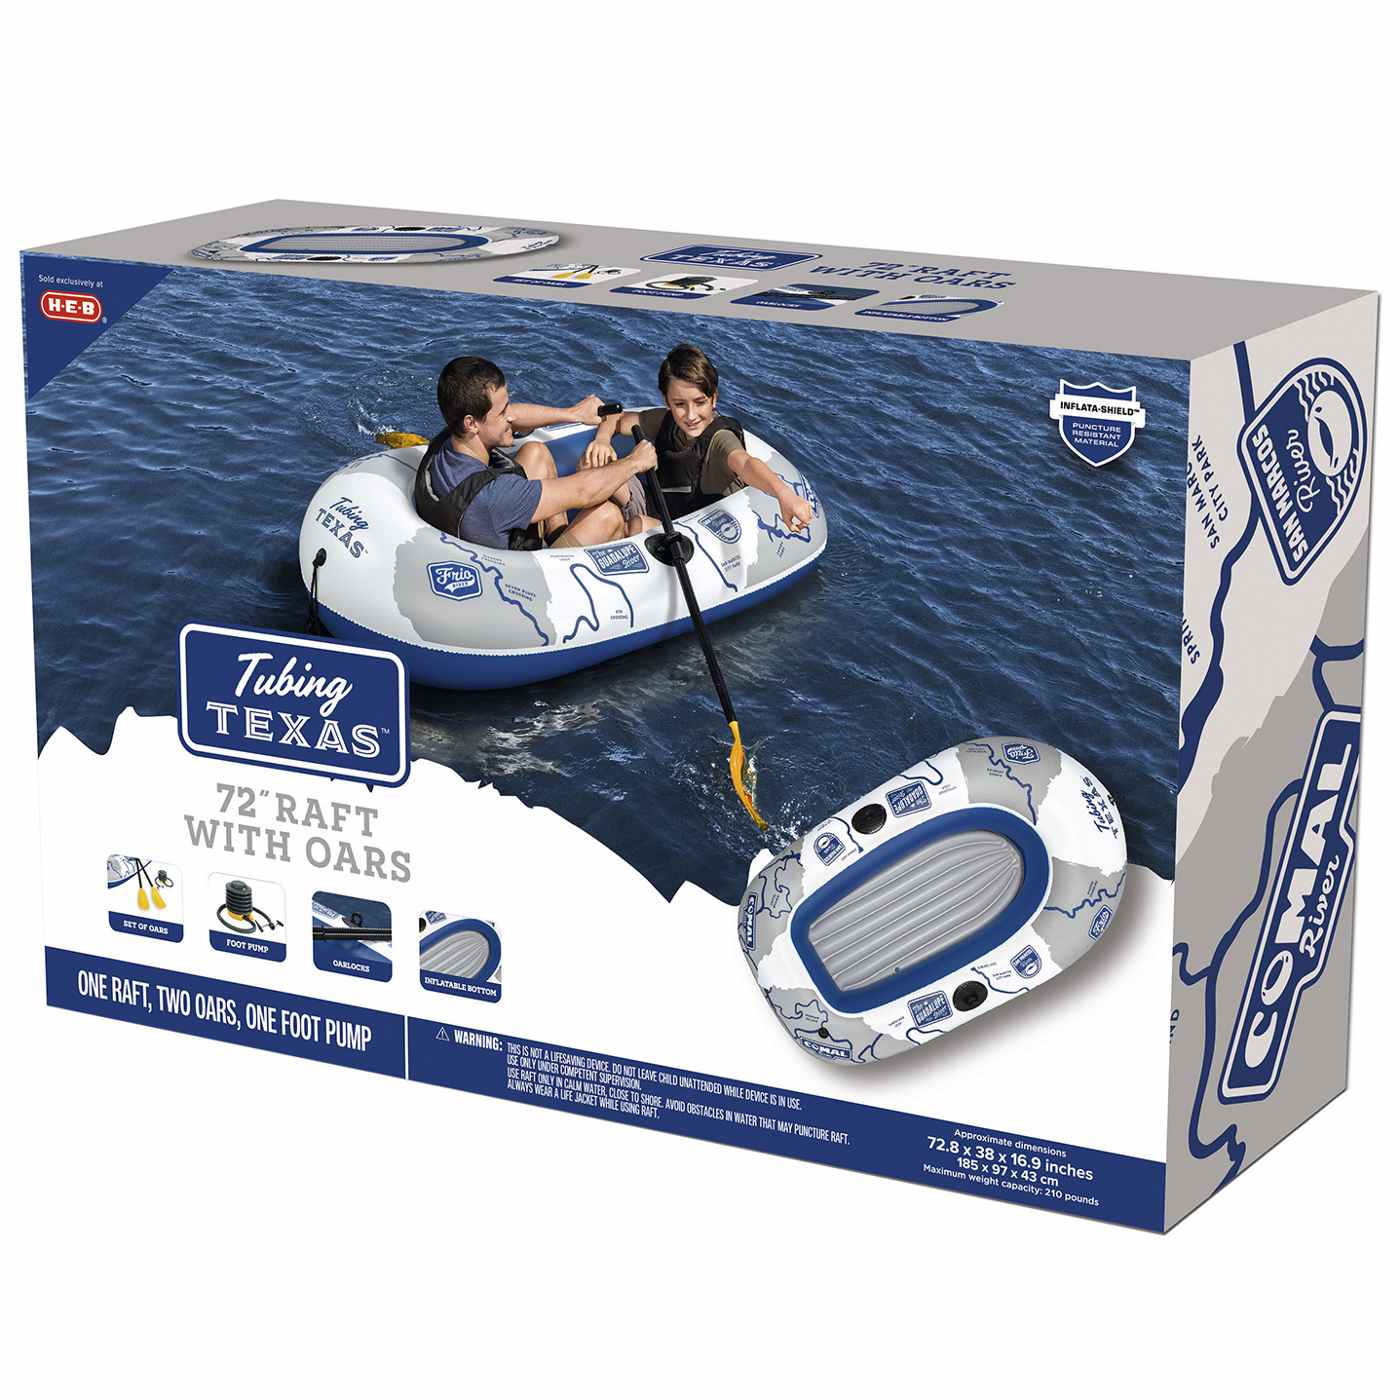 H-E-B Tubing Texas Inflatable Raft with Oars; image 2 of 3